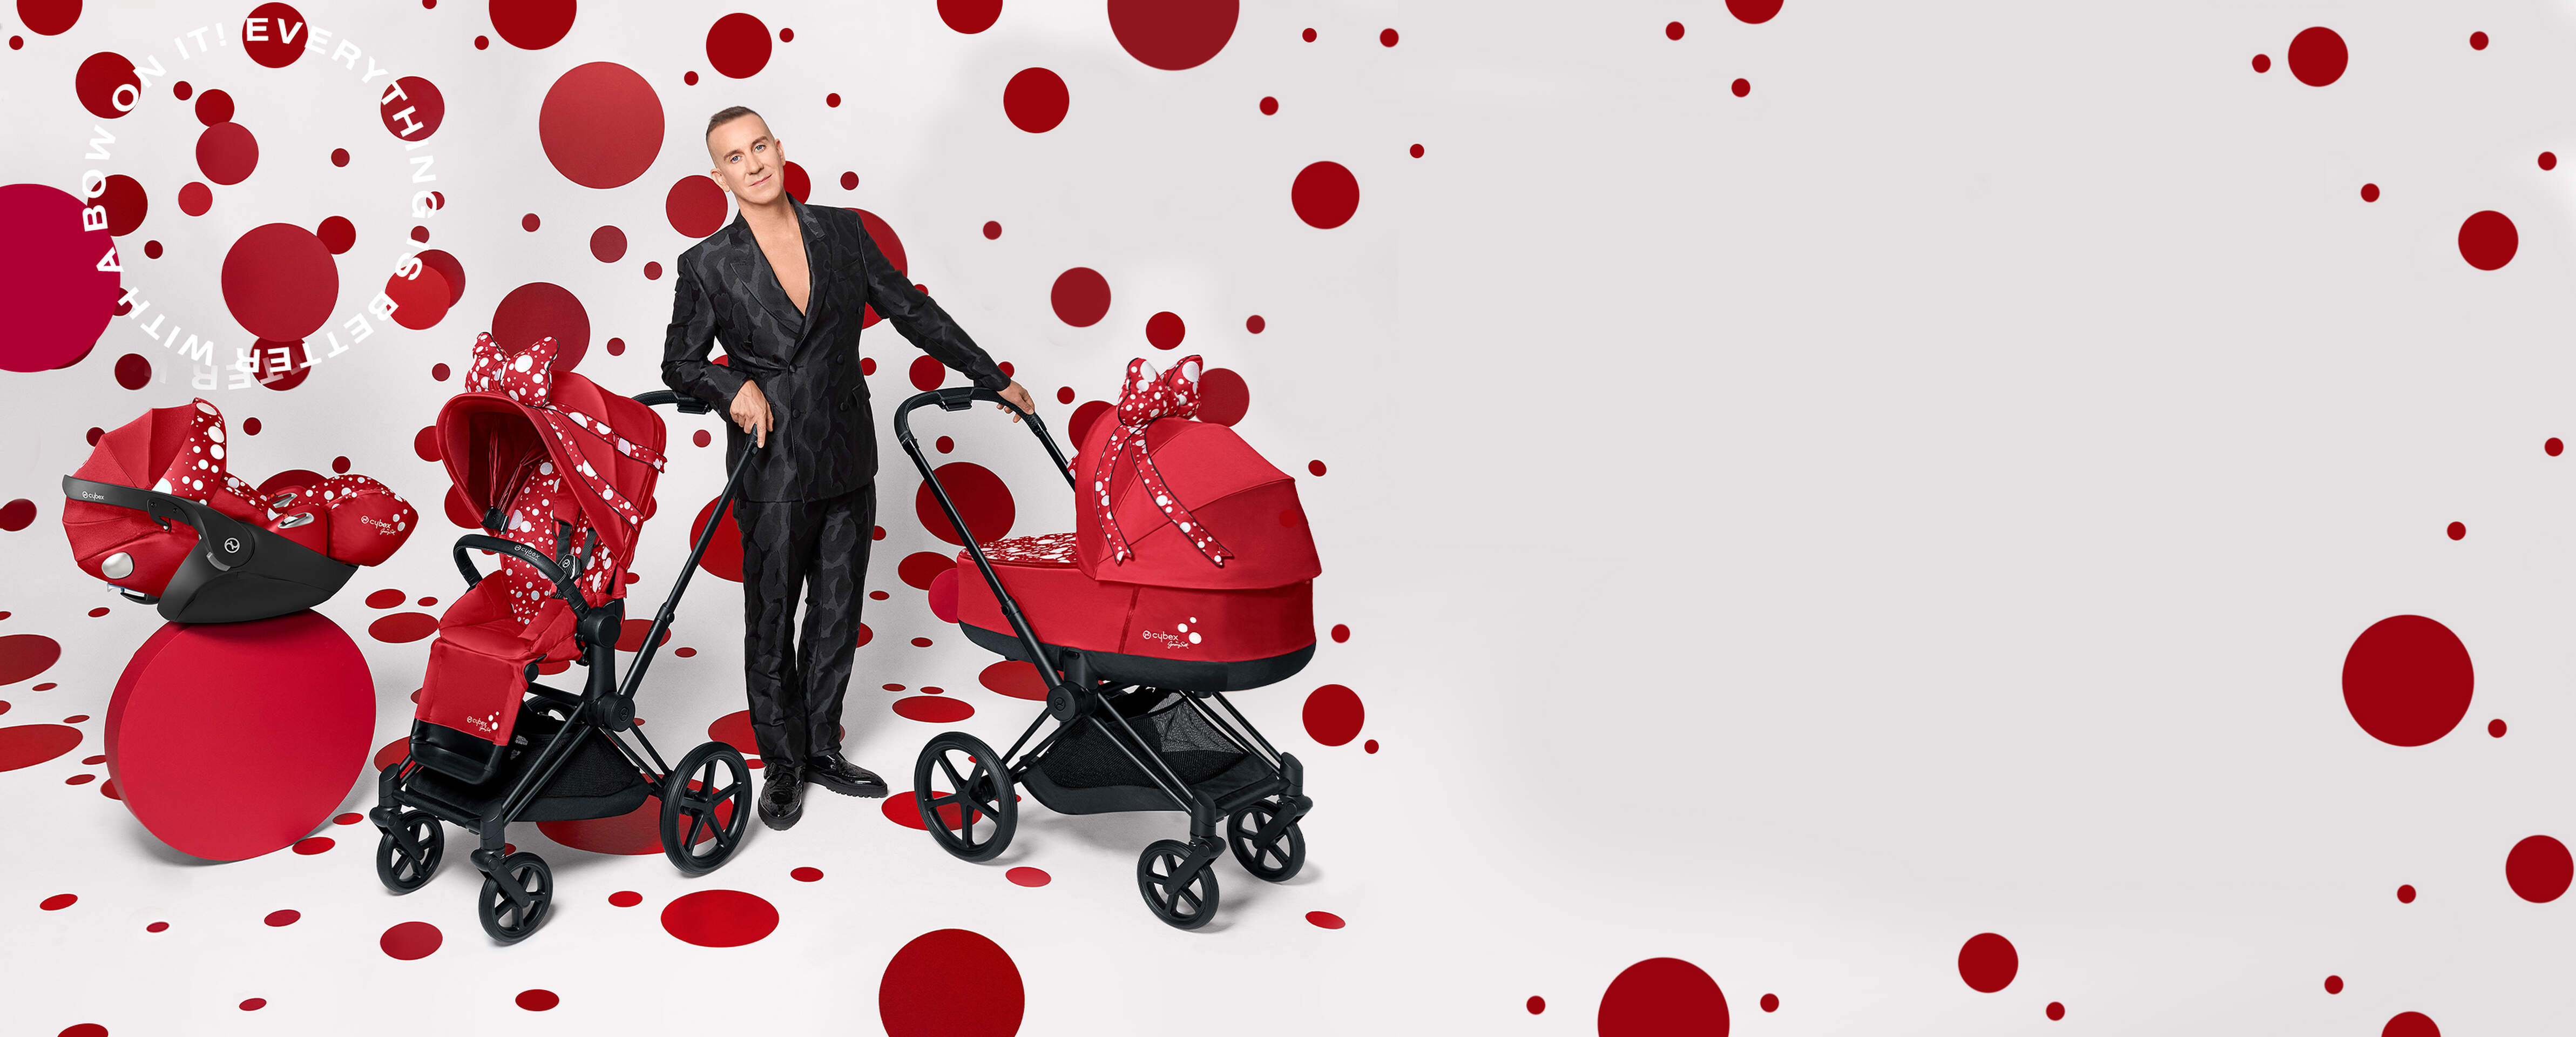 Cybex by Jeremy Scott Petticoat Collection Banner Image